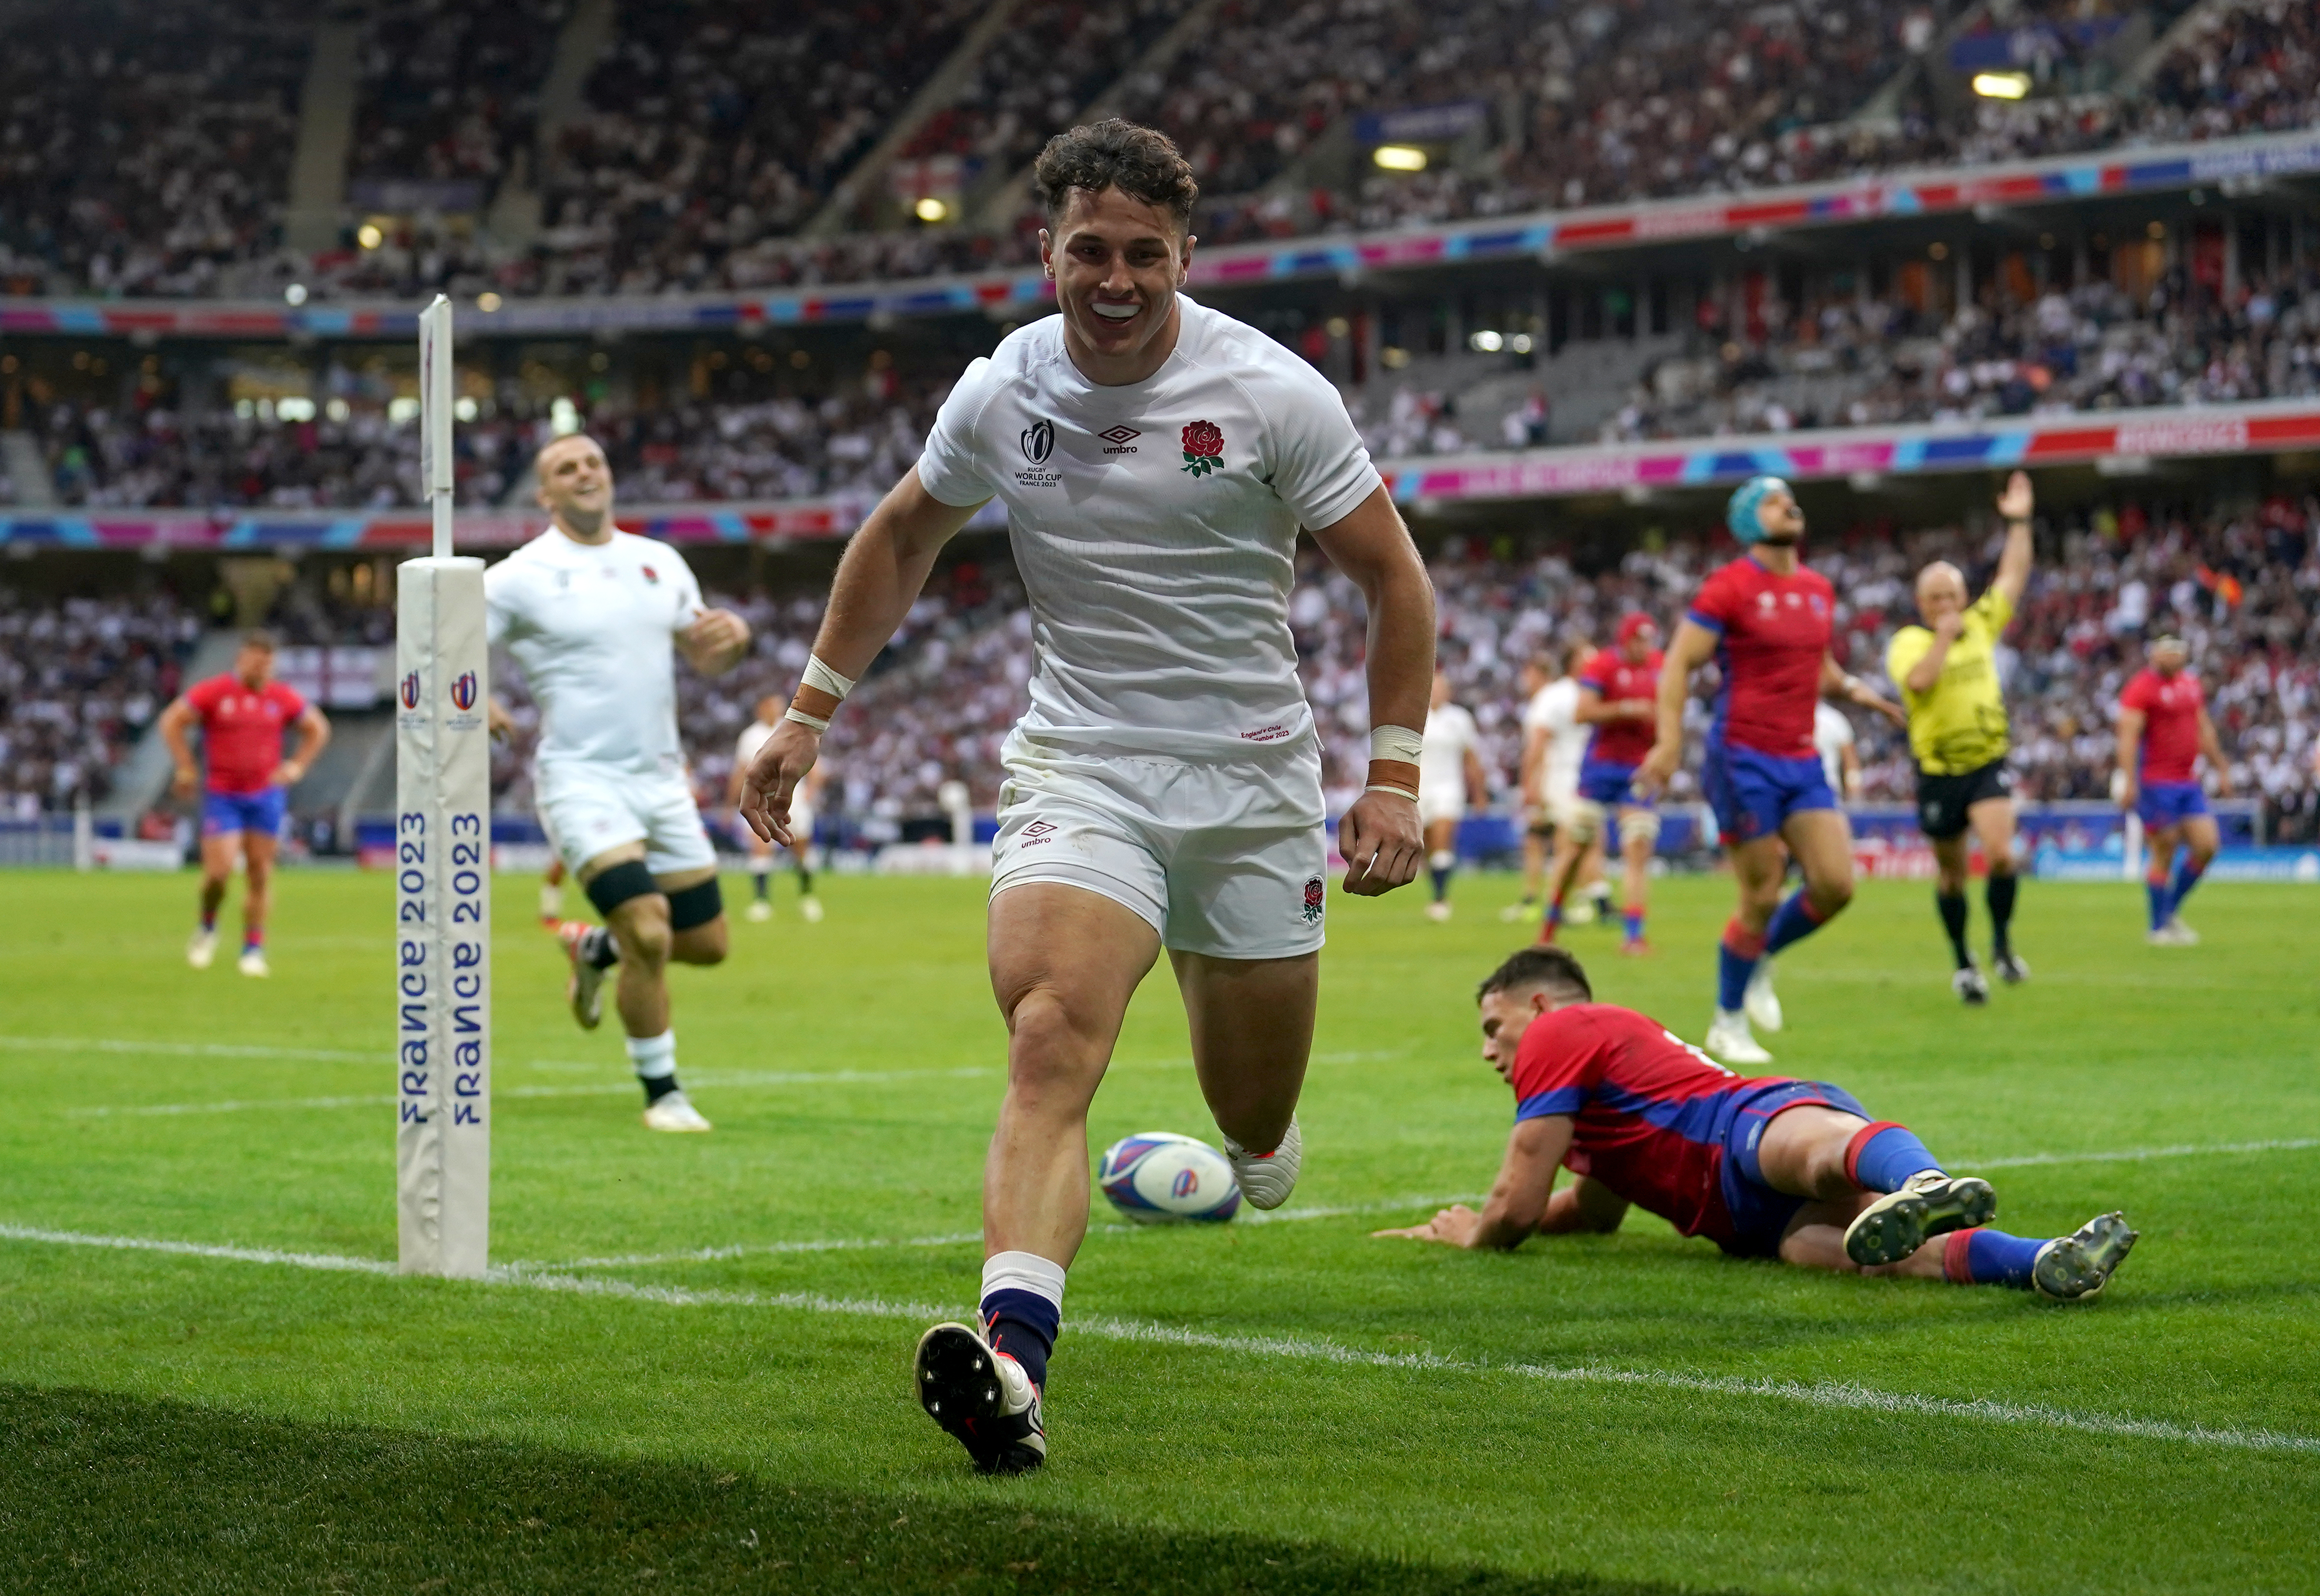 Henry Arundell went on a try-scoring rampage against Chile at the World Cup